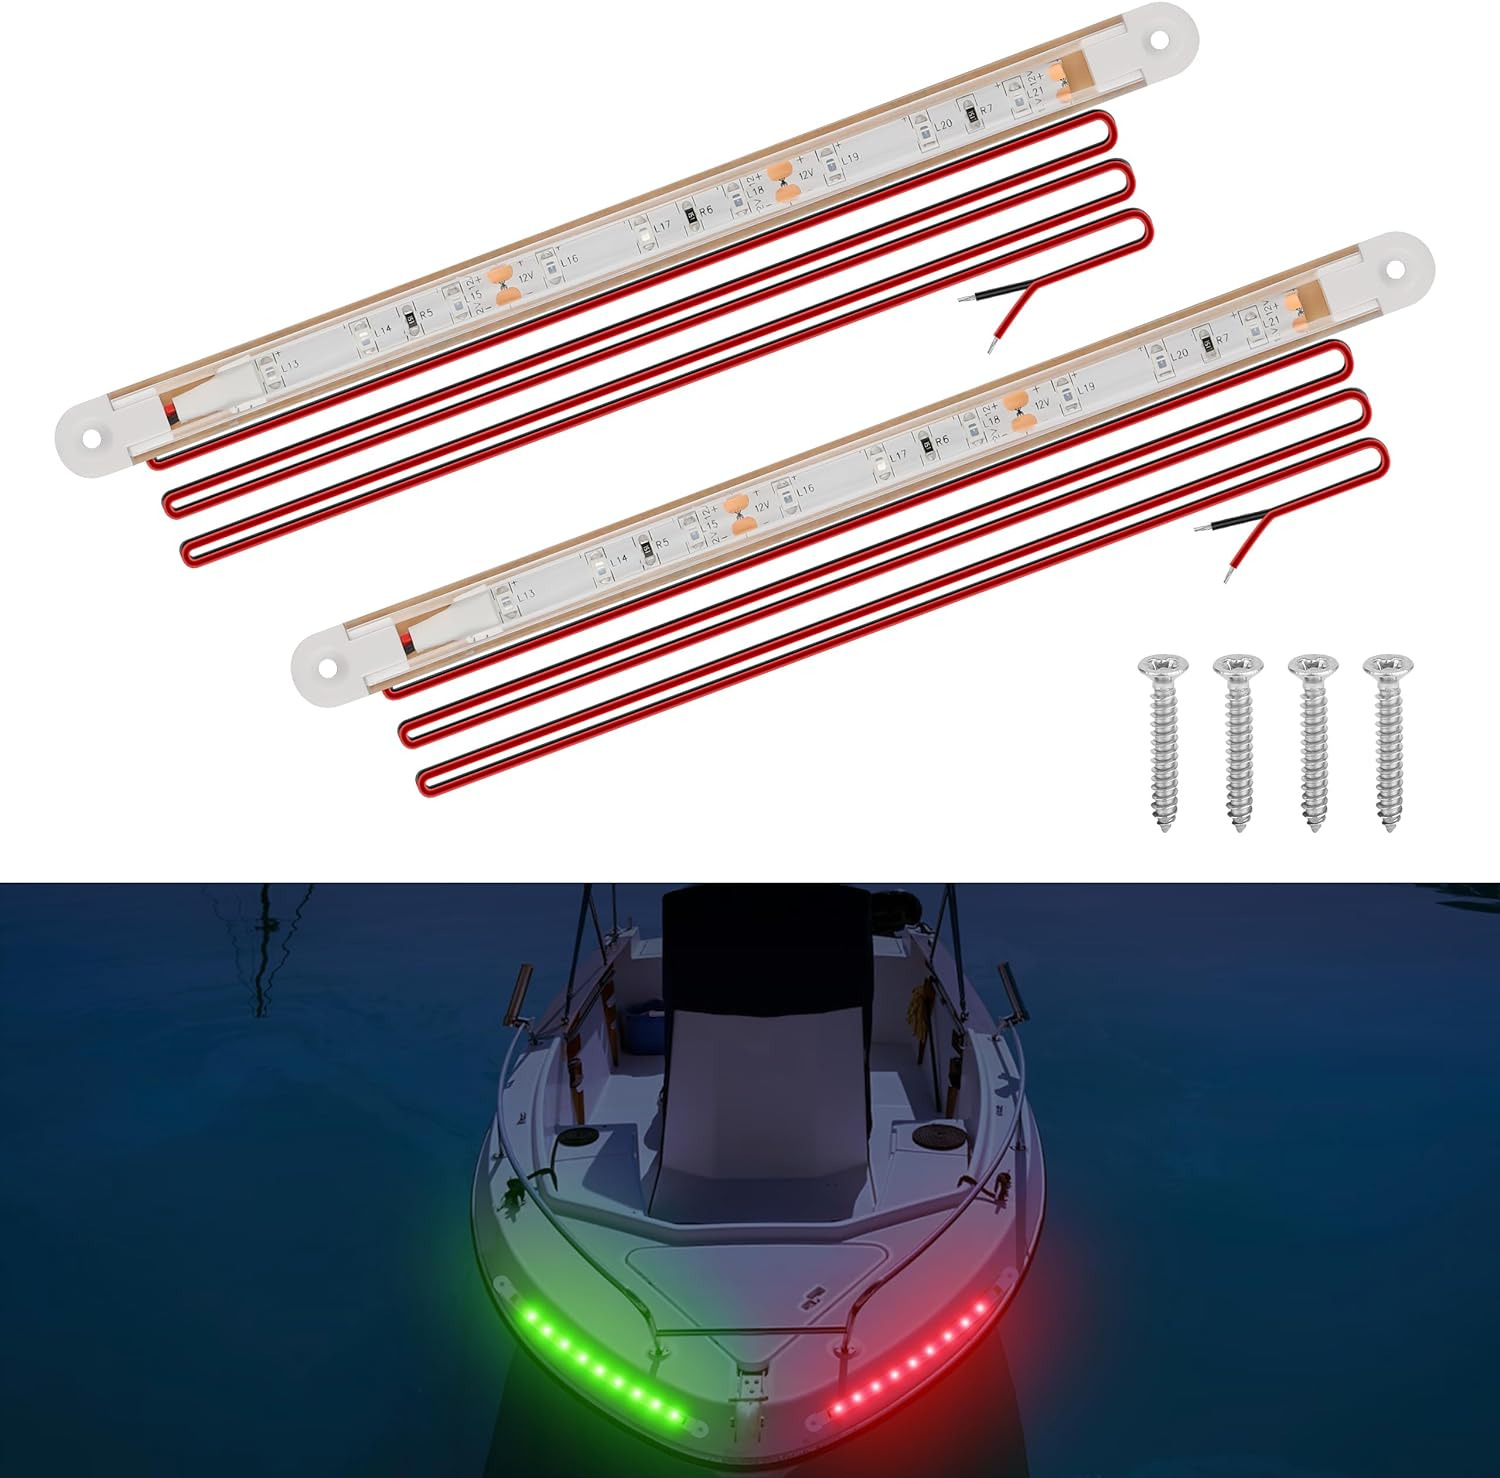 Navigation Lights For Boats Led Boat Red And Green Bow Lights Boat Night Fish...